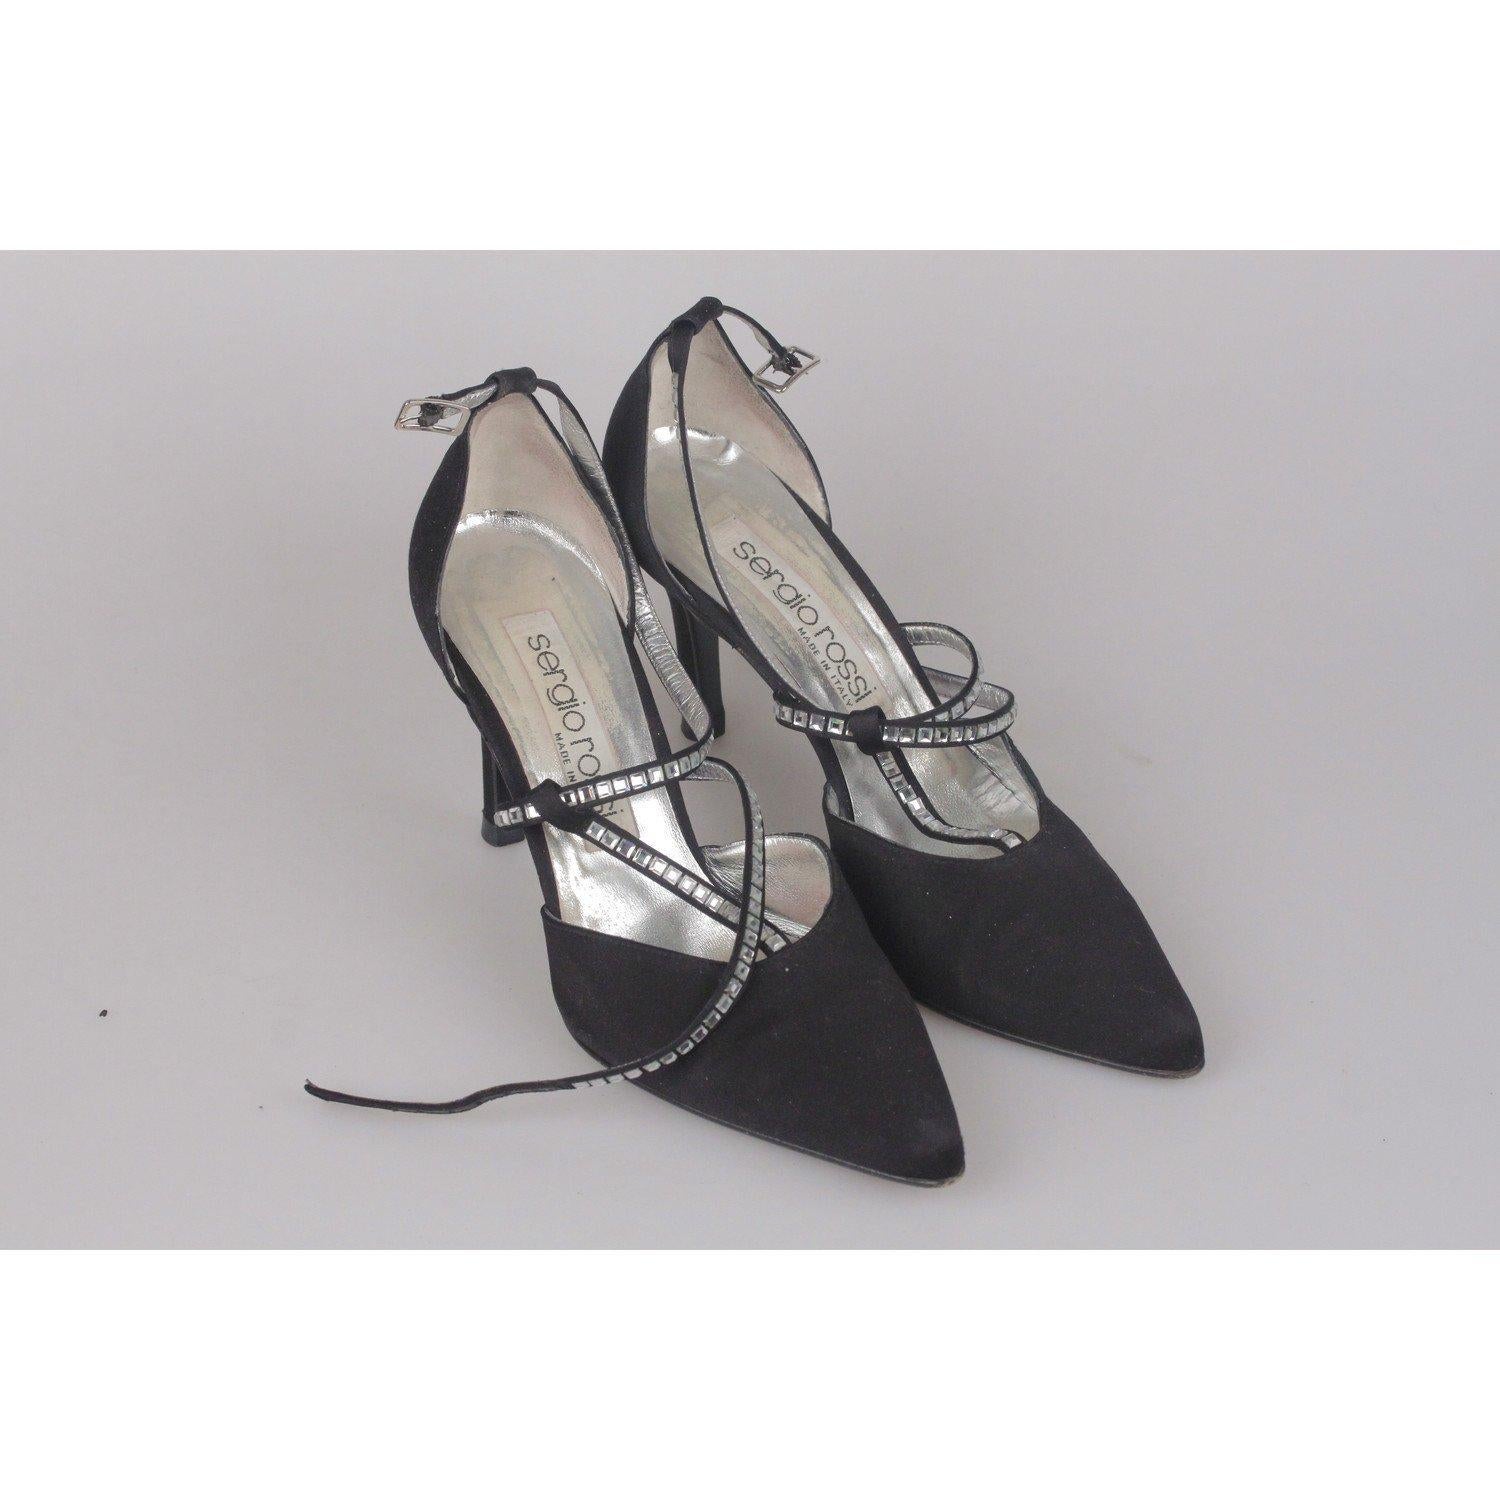 MATERIAL: Fabric COLOR: Black MODEL: D'orsay GENDER: Women CONDITION DETAILS: Some nomal wear of use on the insoles, some scartches and wear of use on the outsoles Any other detail which is not mentioned may be seen on the item pictures. Please do